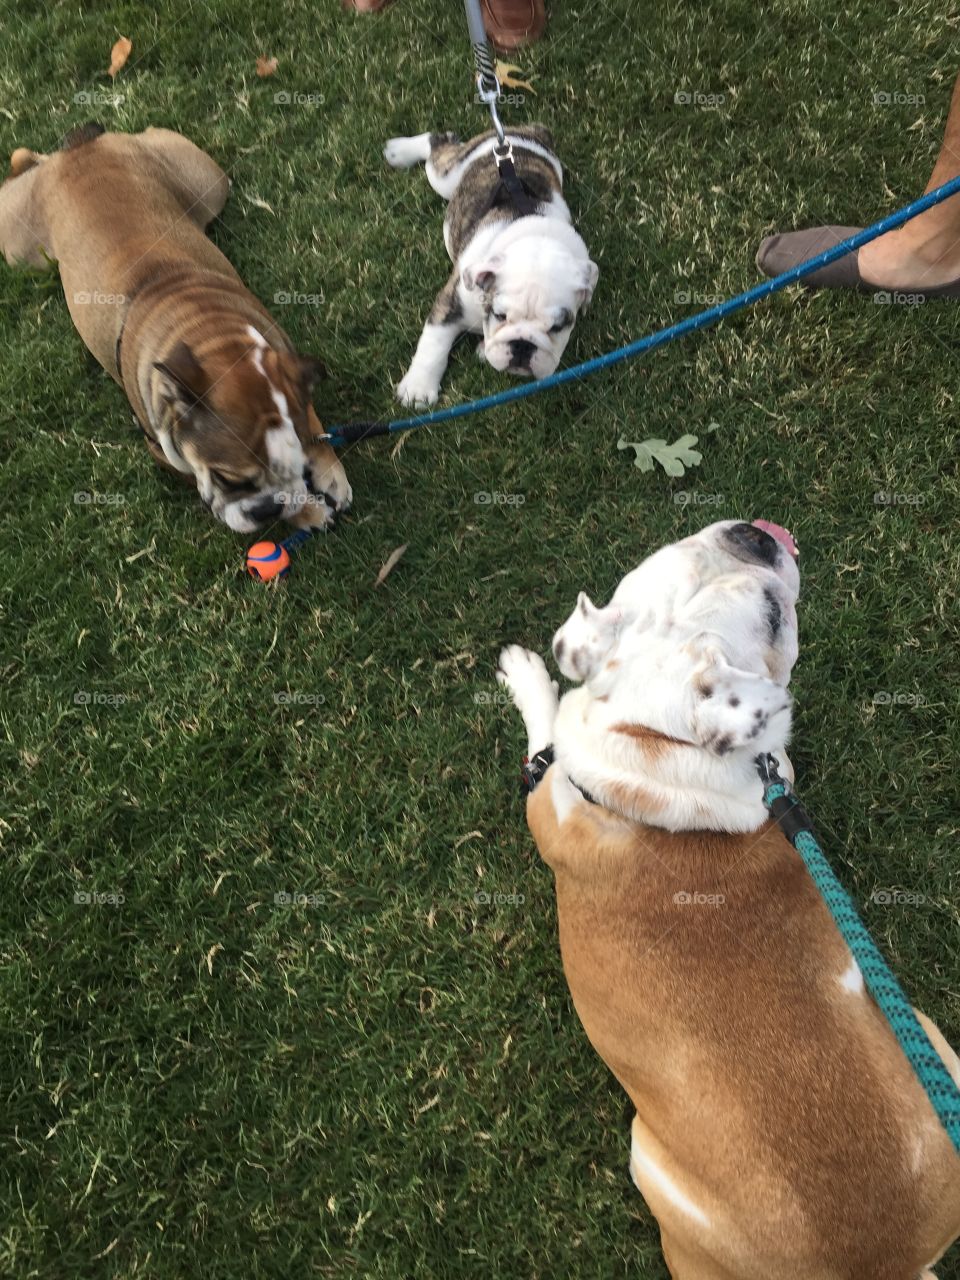 These three lazy bulldogs plopped right down into the grass. 